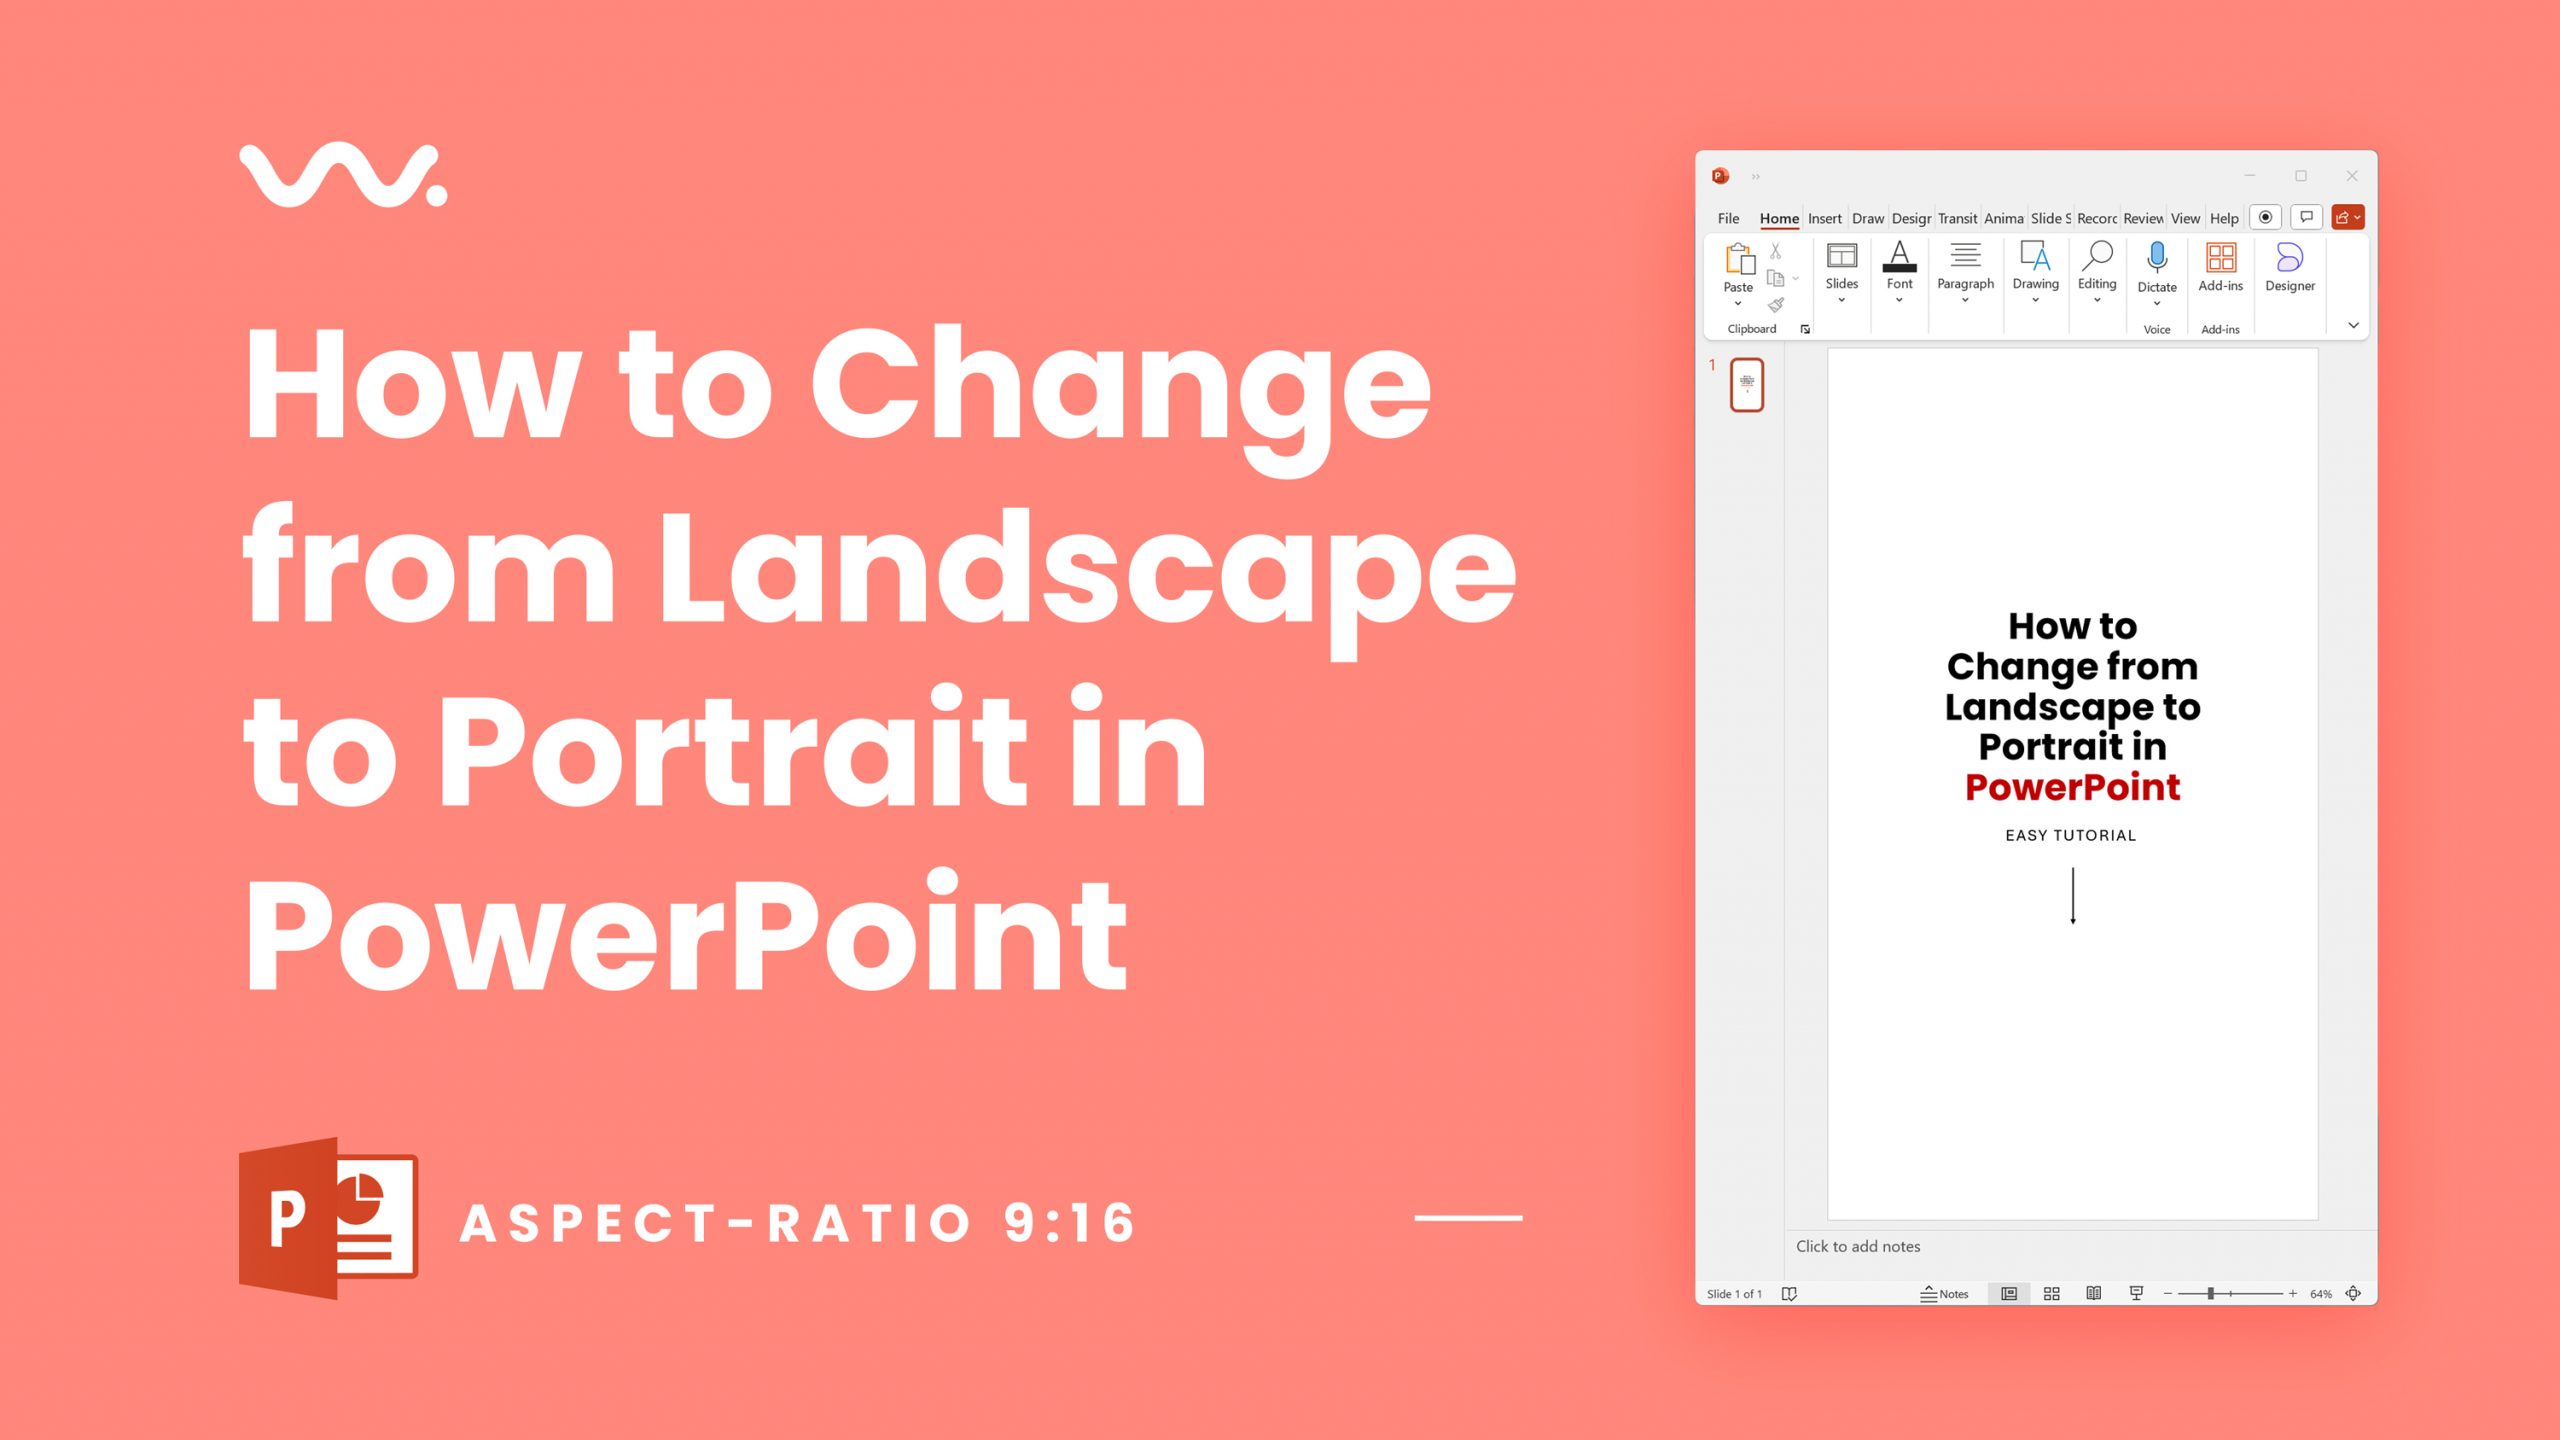 How to Change from Landscape to Portrait in PowerPoint